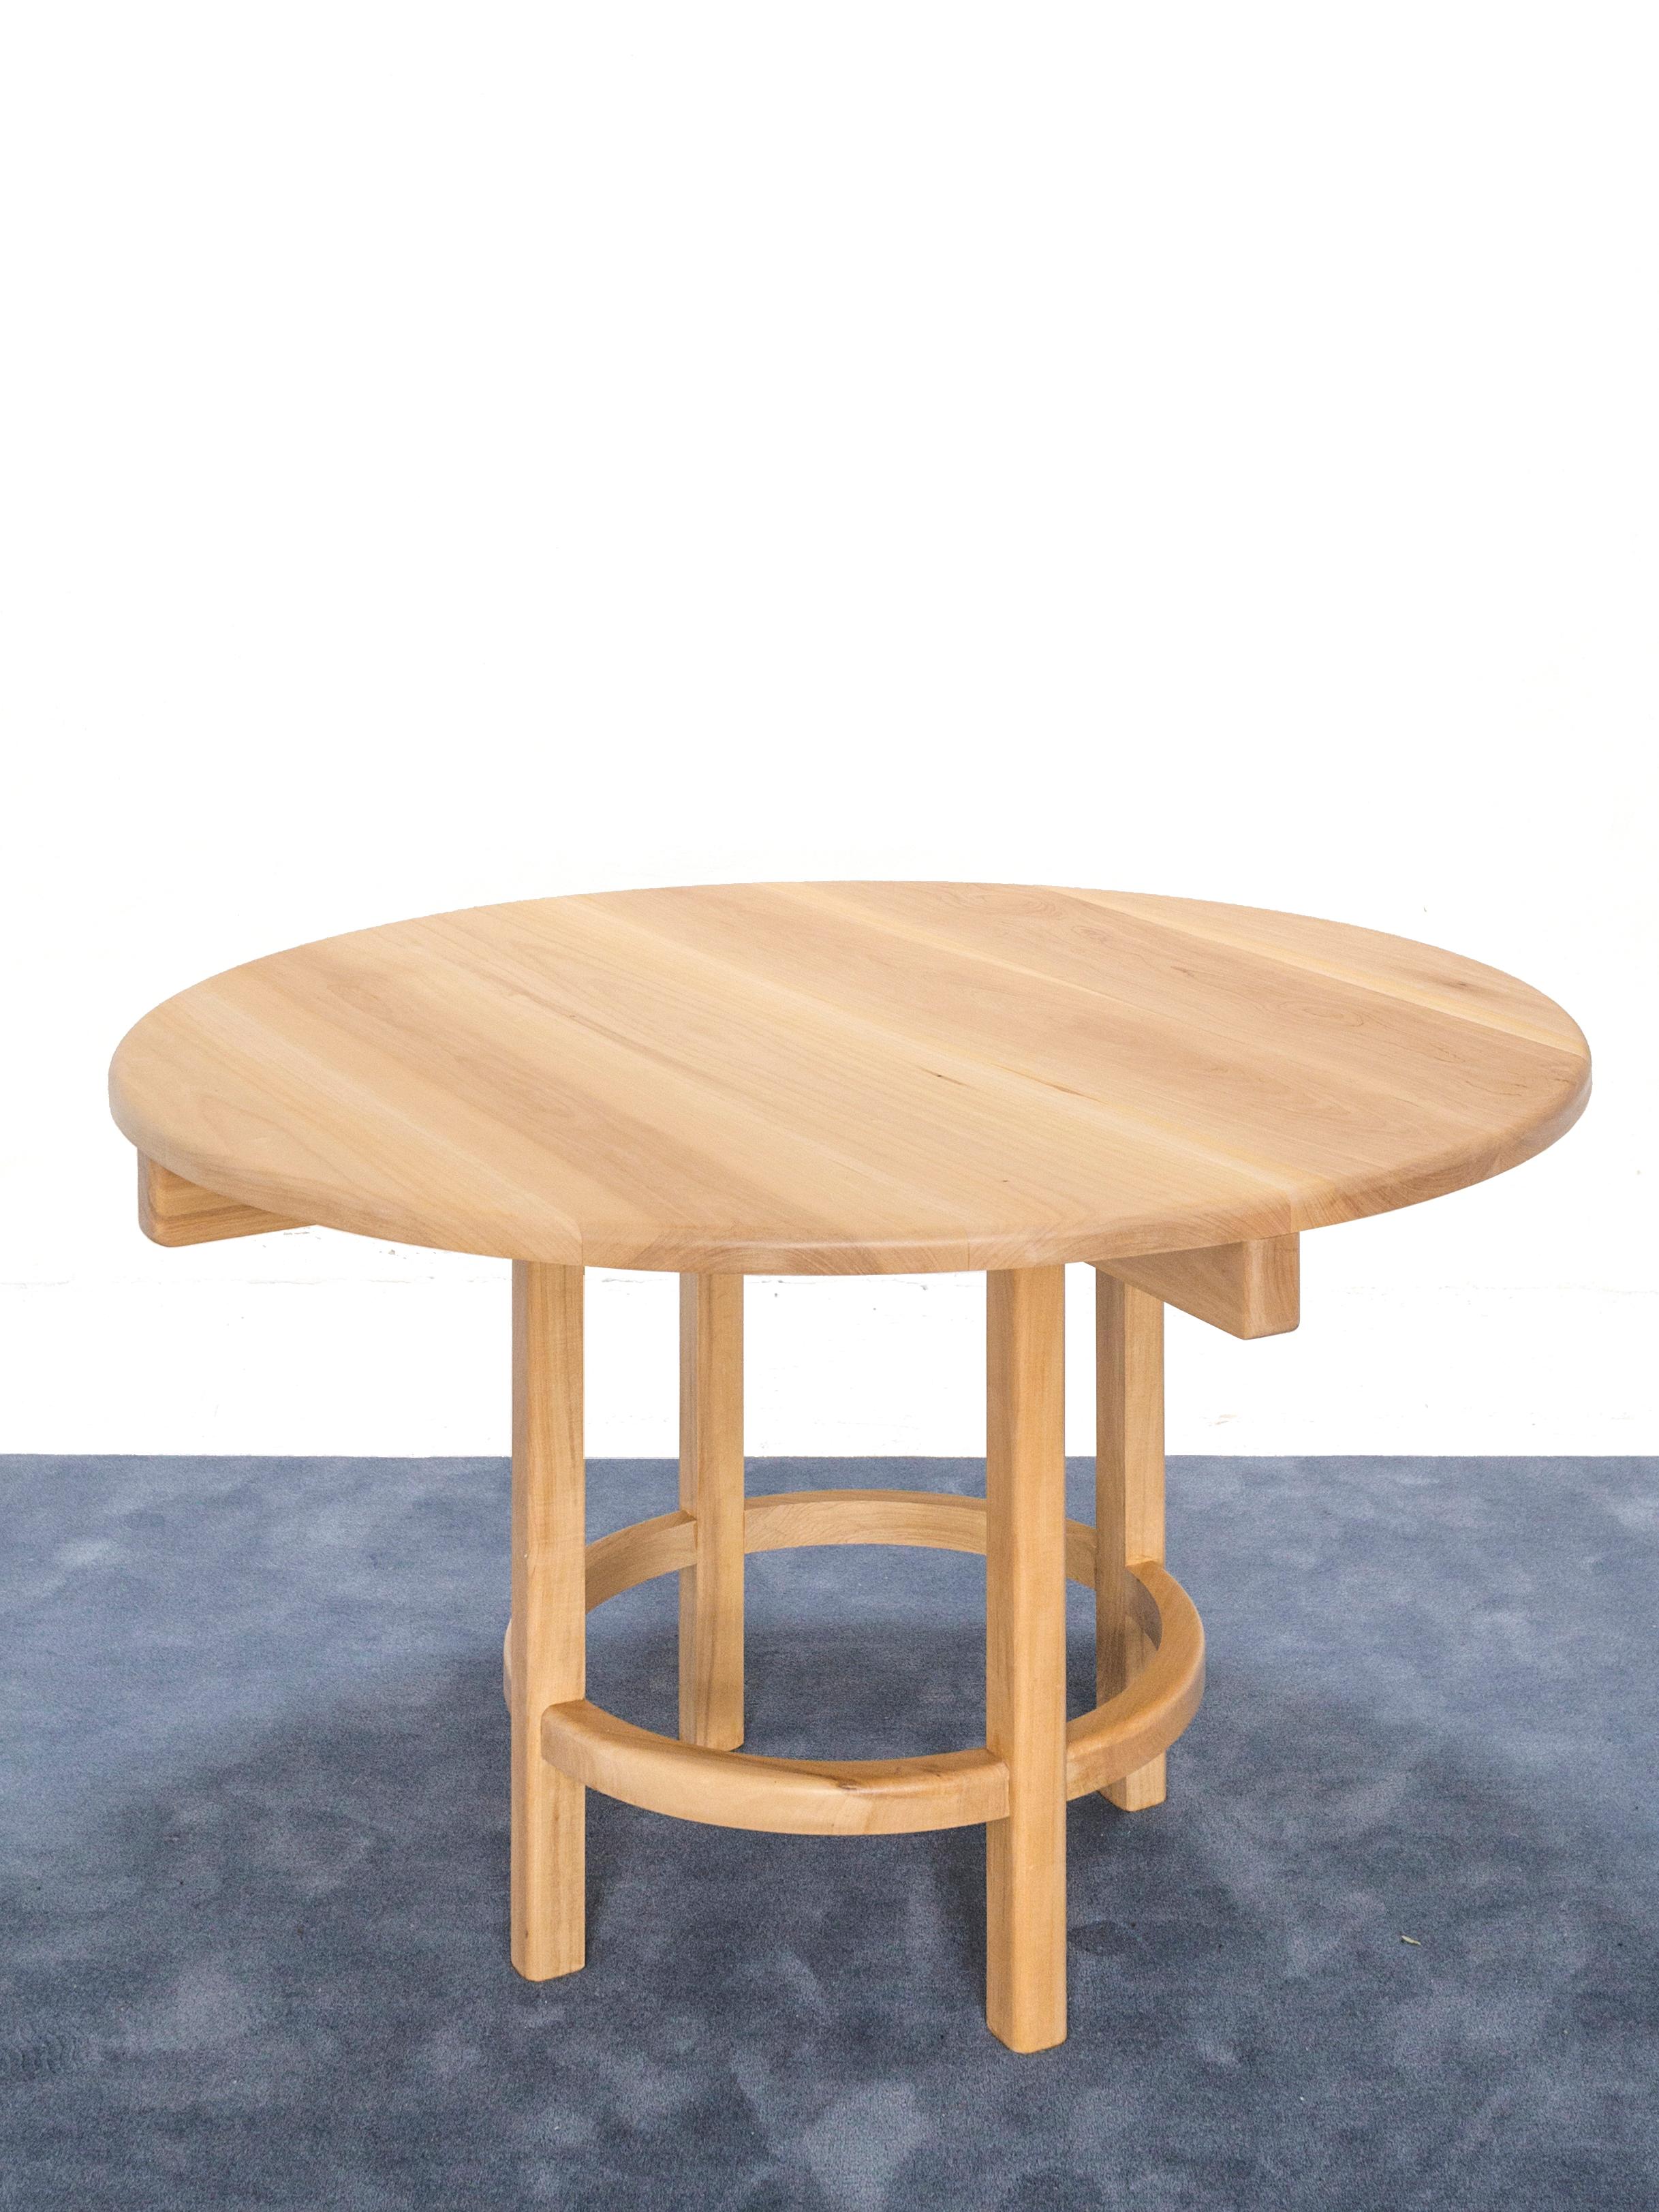 Argentine Orno Round Dining Table by Ries